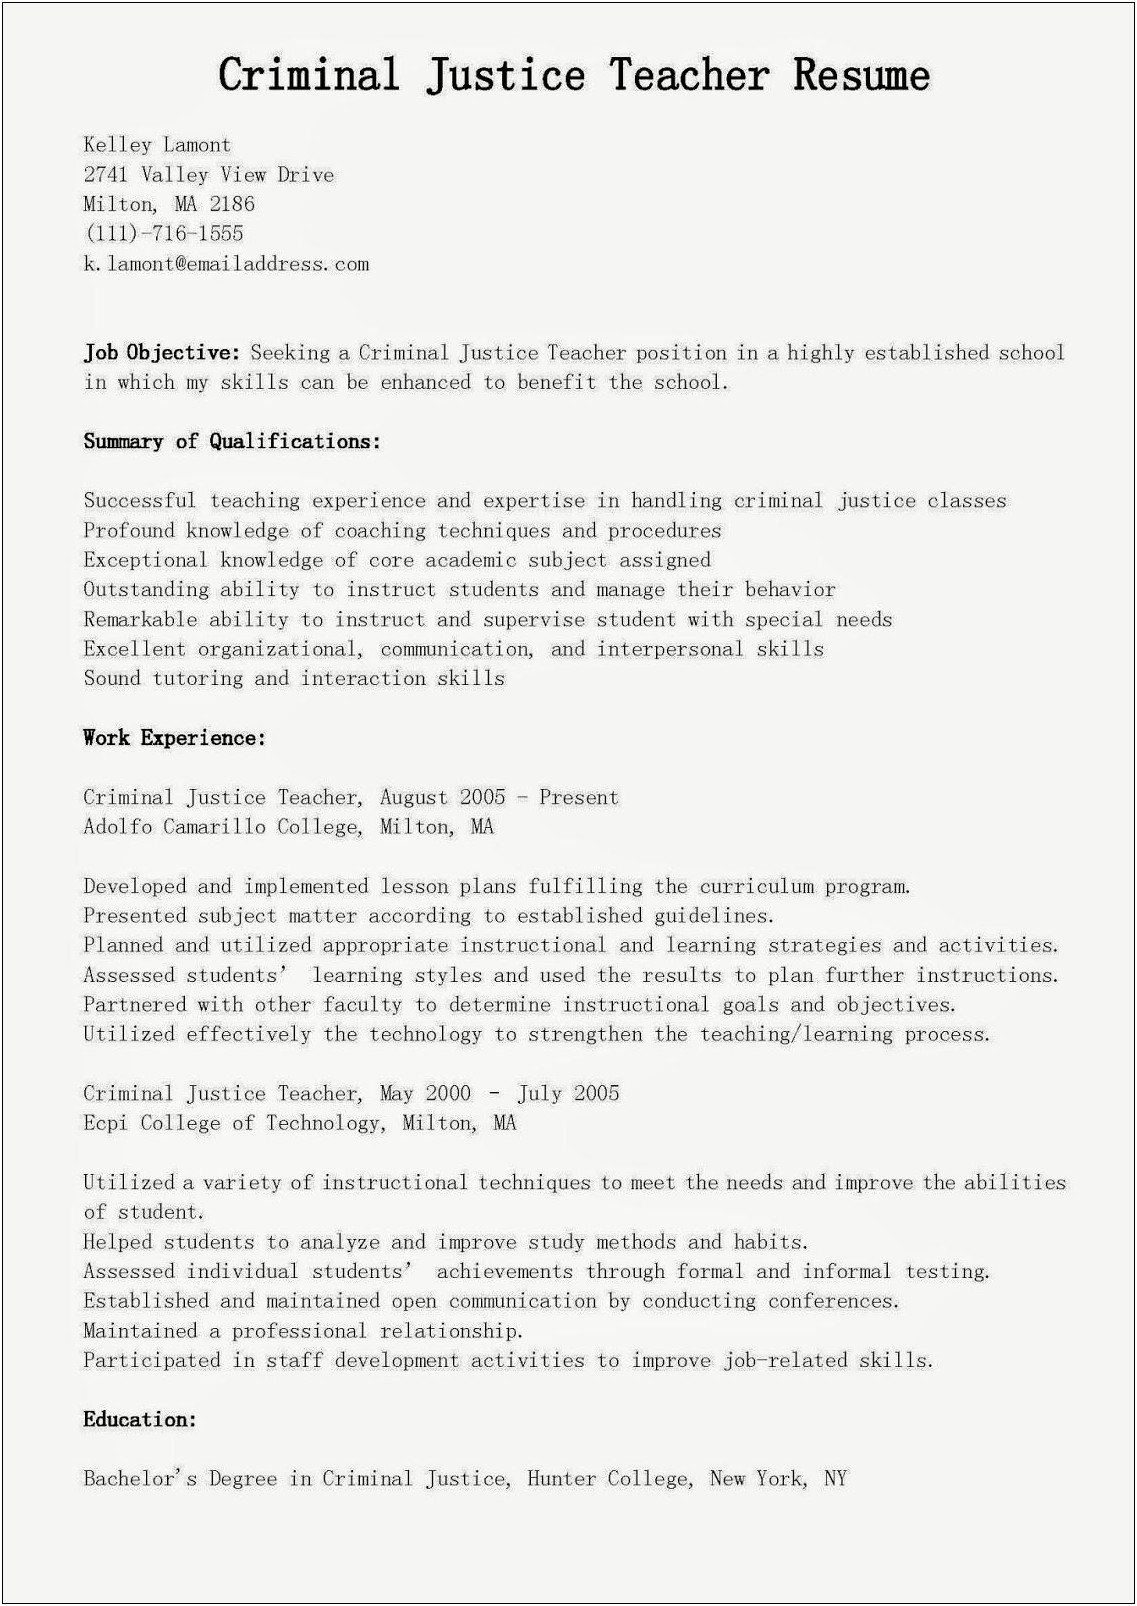 Summary Of Qualifications For Criminal Justice Resume